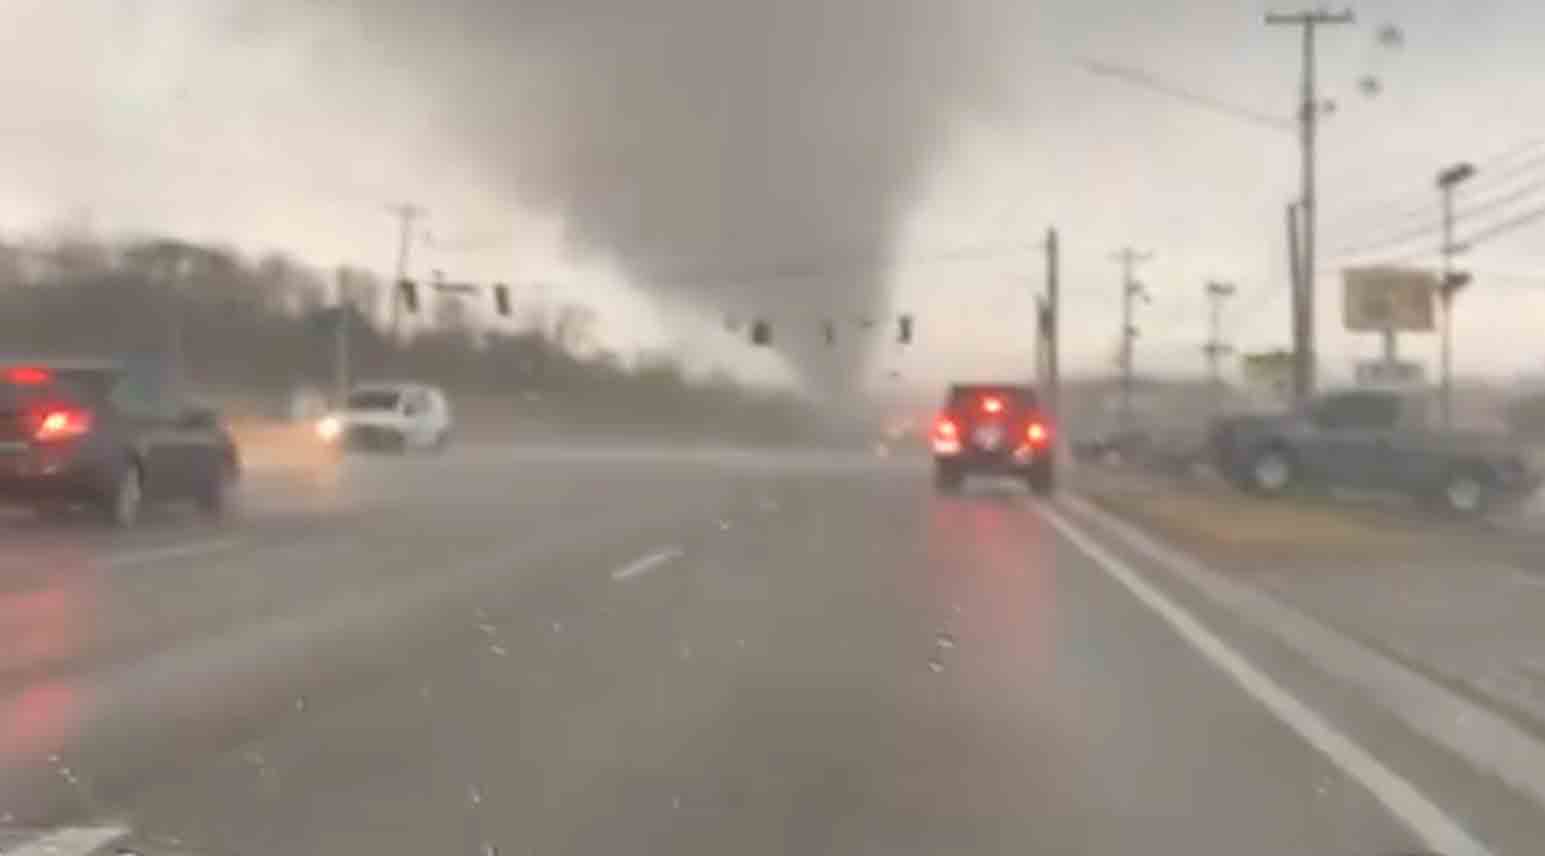 Video shows tornado hitting cities in Tennessee, leaving at least 6 fatal victims. Photo and videos: Reproduction from Twitter